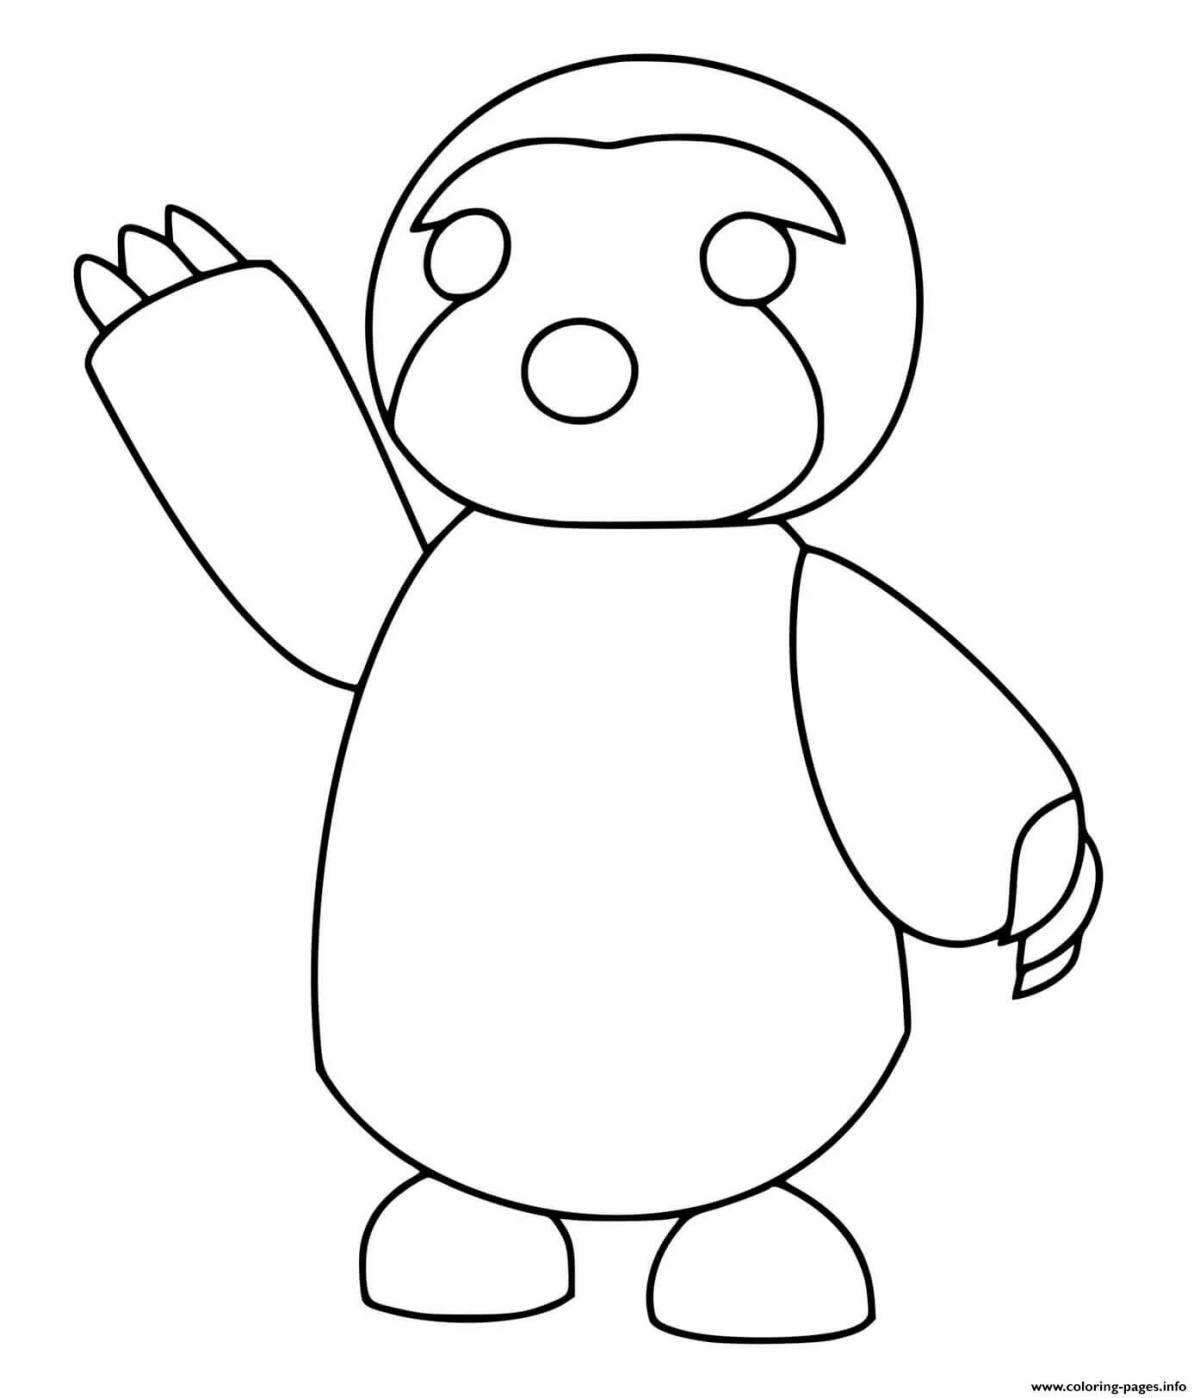 Colorful adopt me roblox coloring page